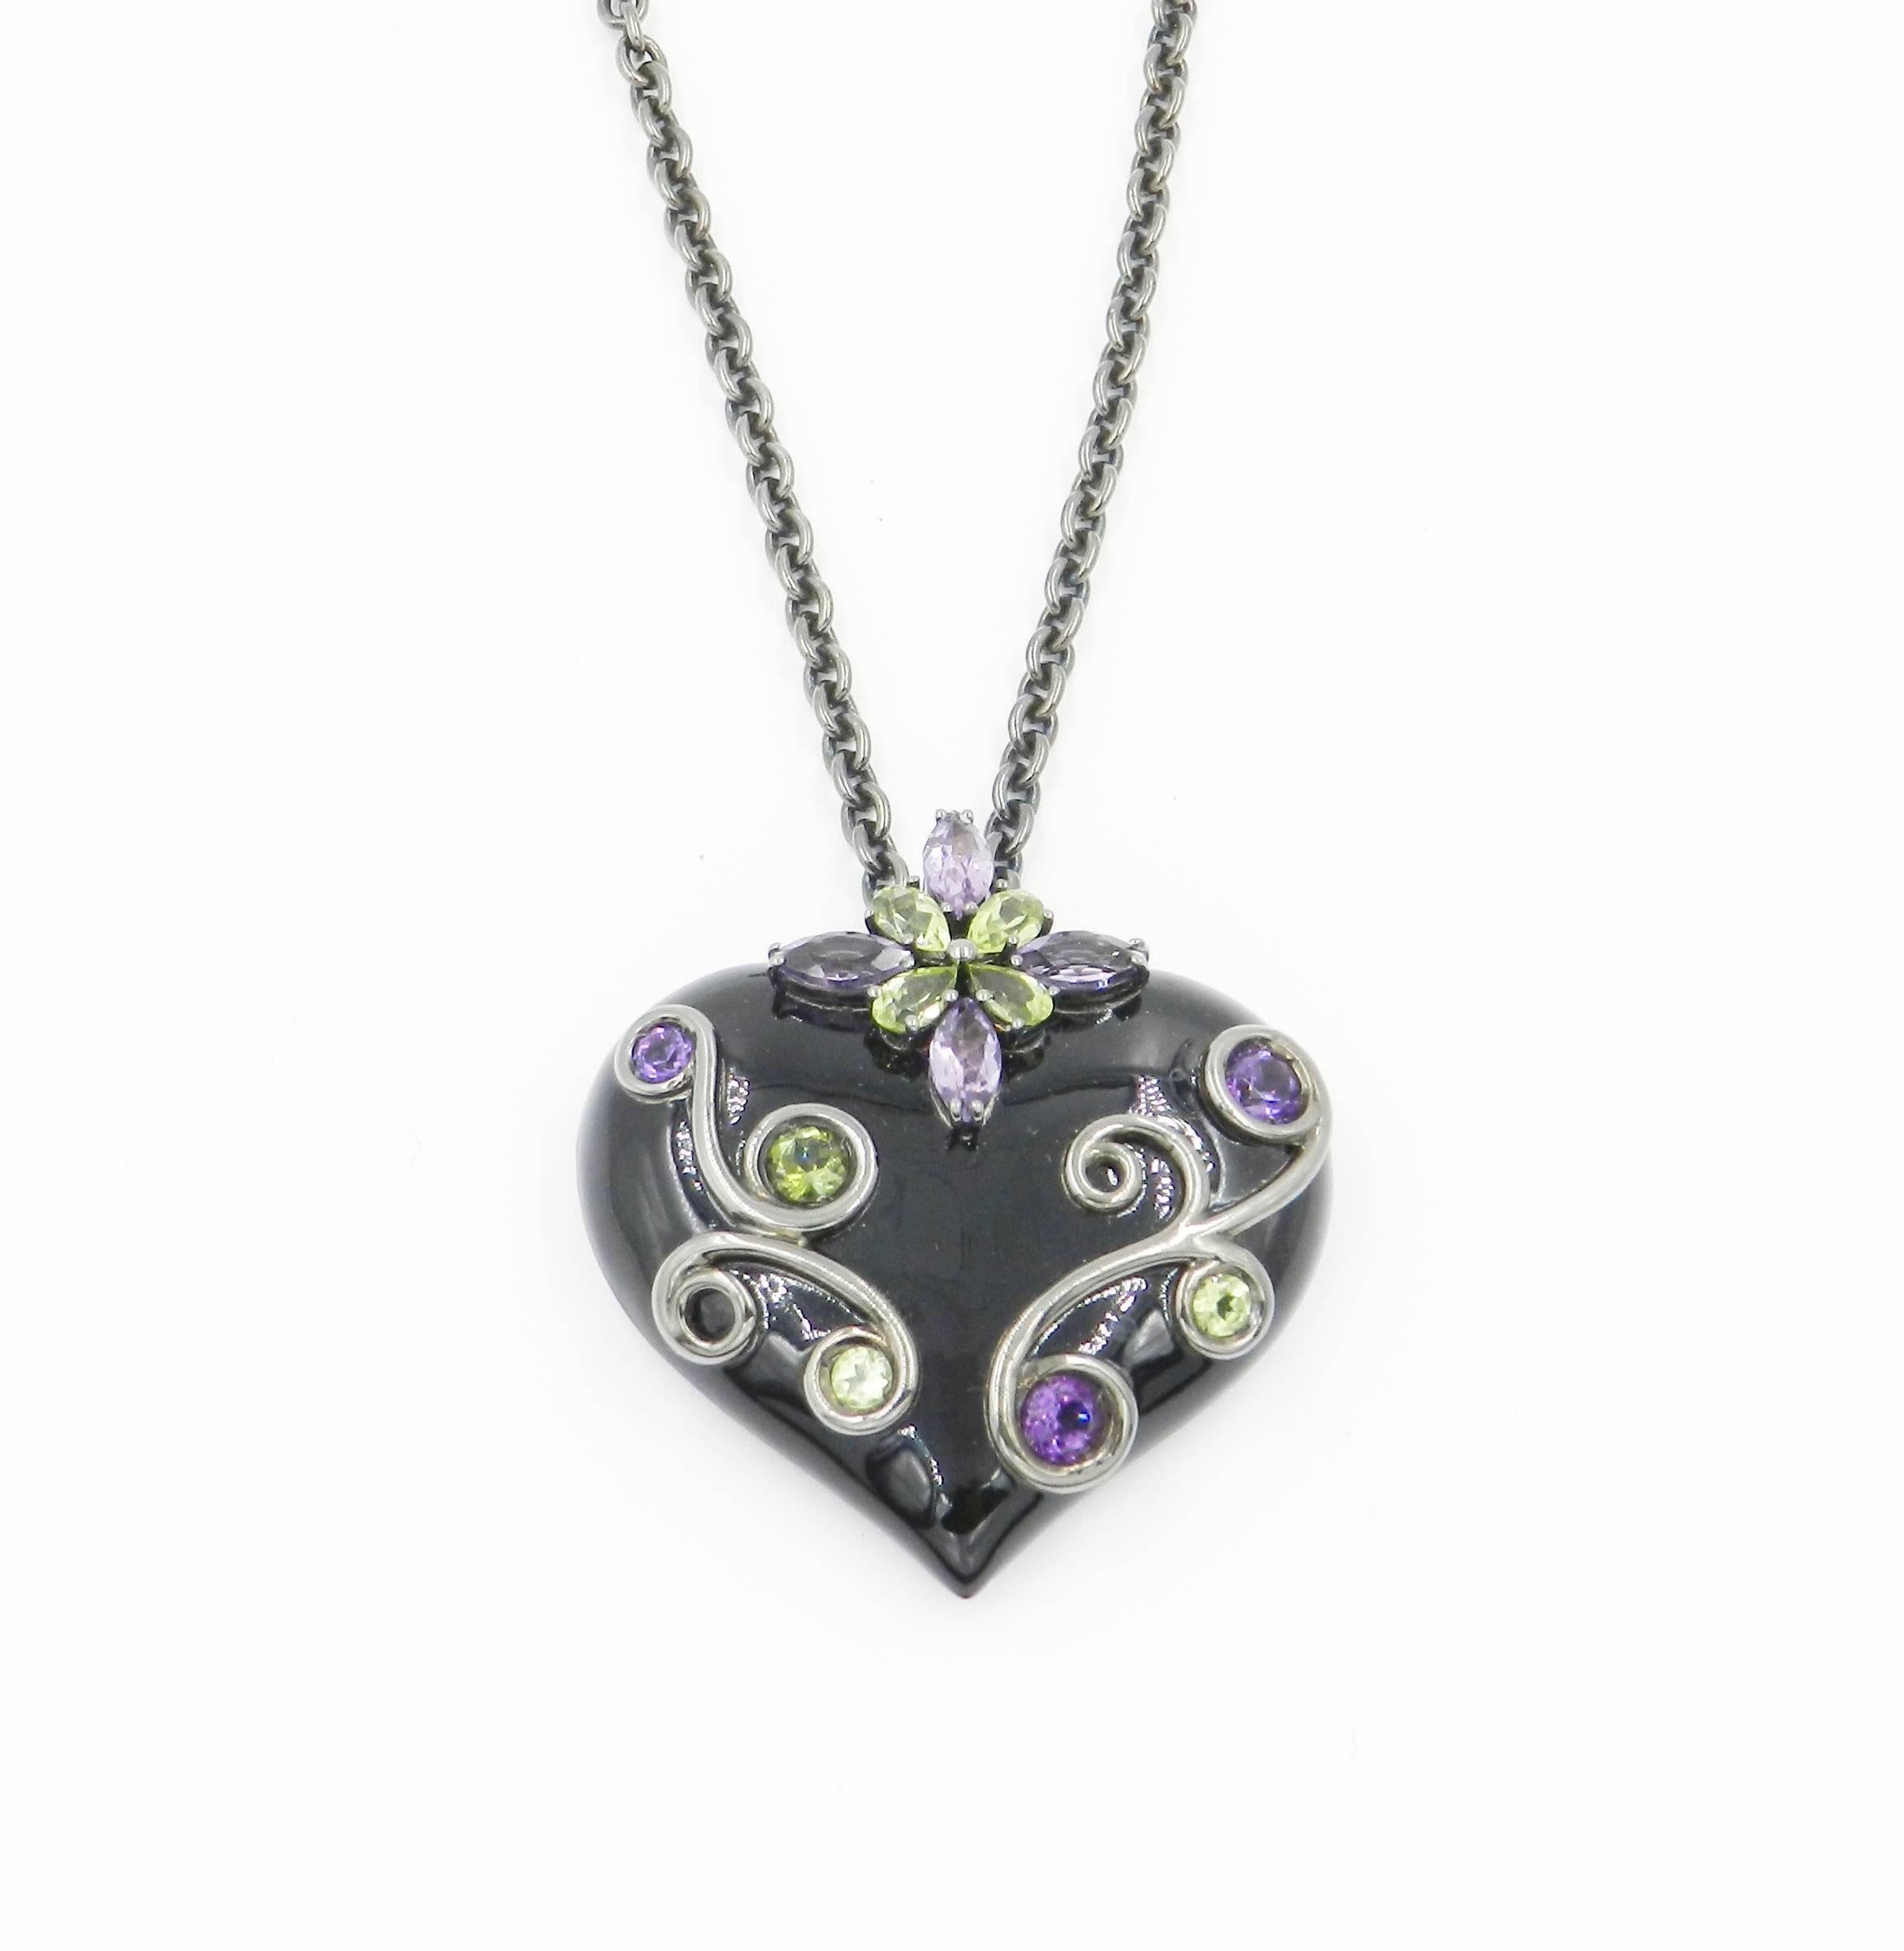 Originally designed across the millenium this fabulous chain with pendant is in silver and features a total of carat 1.09 of round  peridot and amethysts. The pendant size is mm 40 x 35. The chain lenght is 50 cm. Handcrafted in Italy, from the